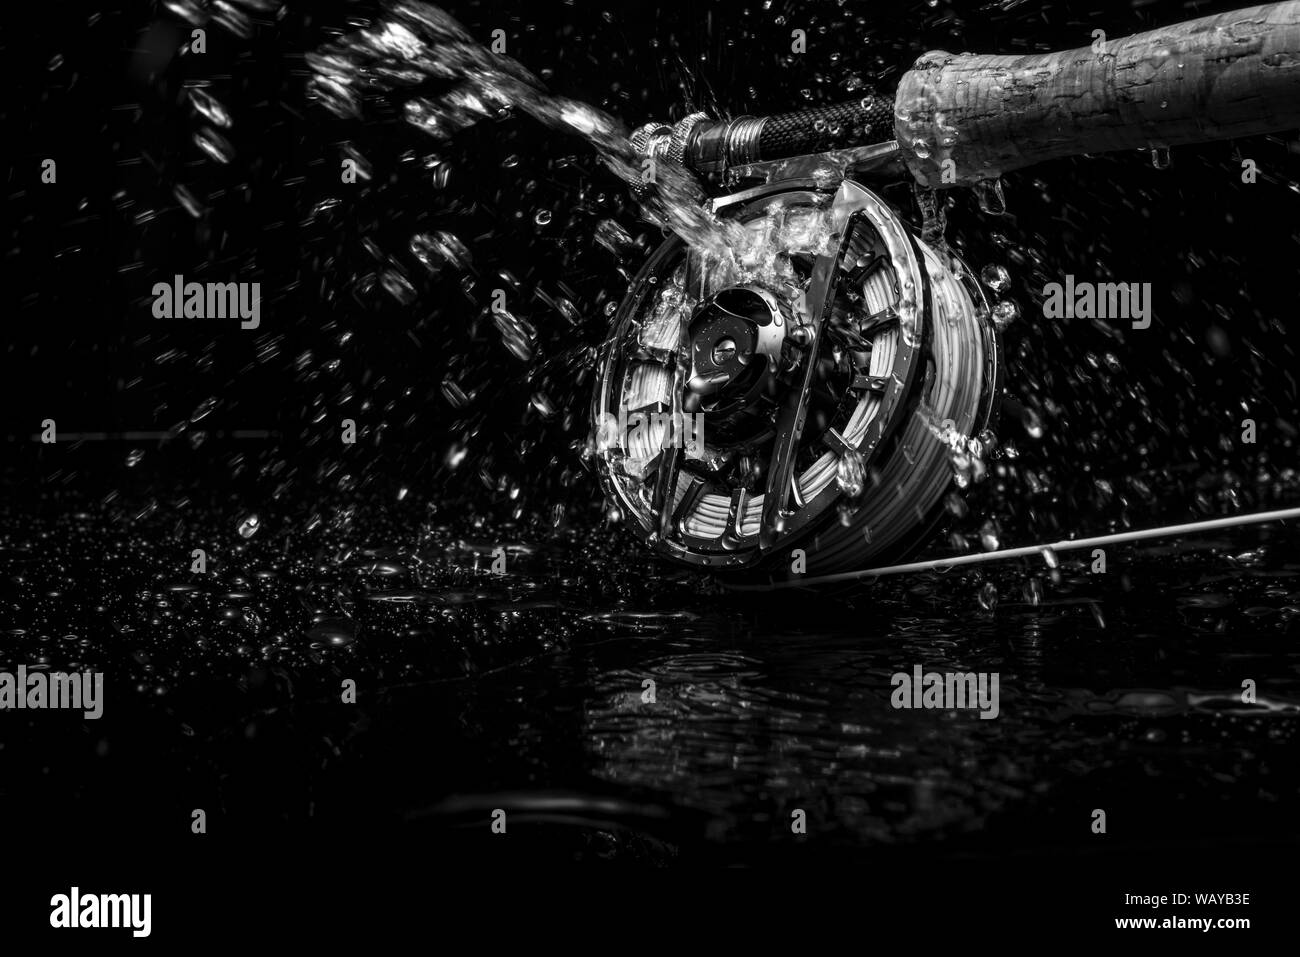 https://c8.alamy.com/comp/WAYB3E/fly-fishing-rod-and-reel-with-water-spray-on-black-in-black-and-white-WAYB3E.jpg